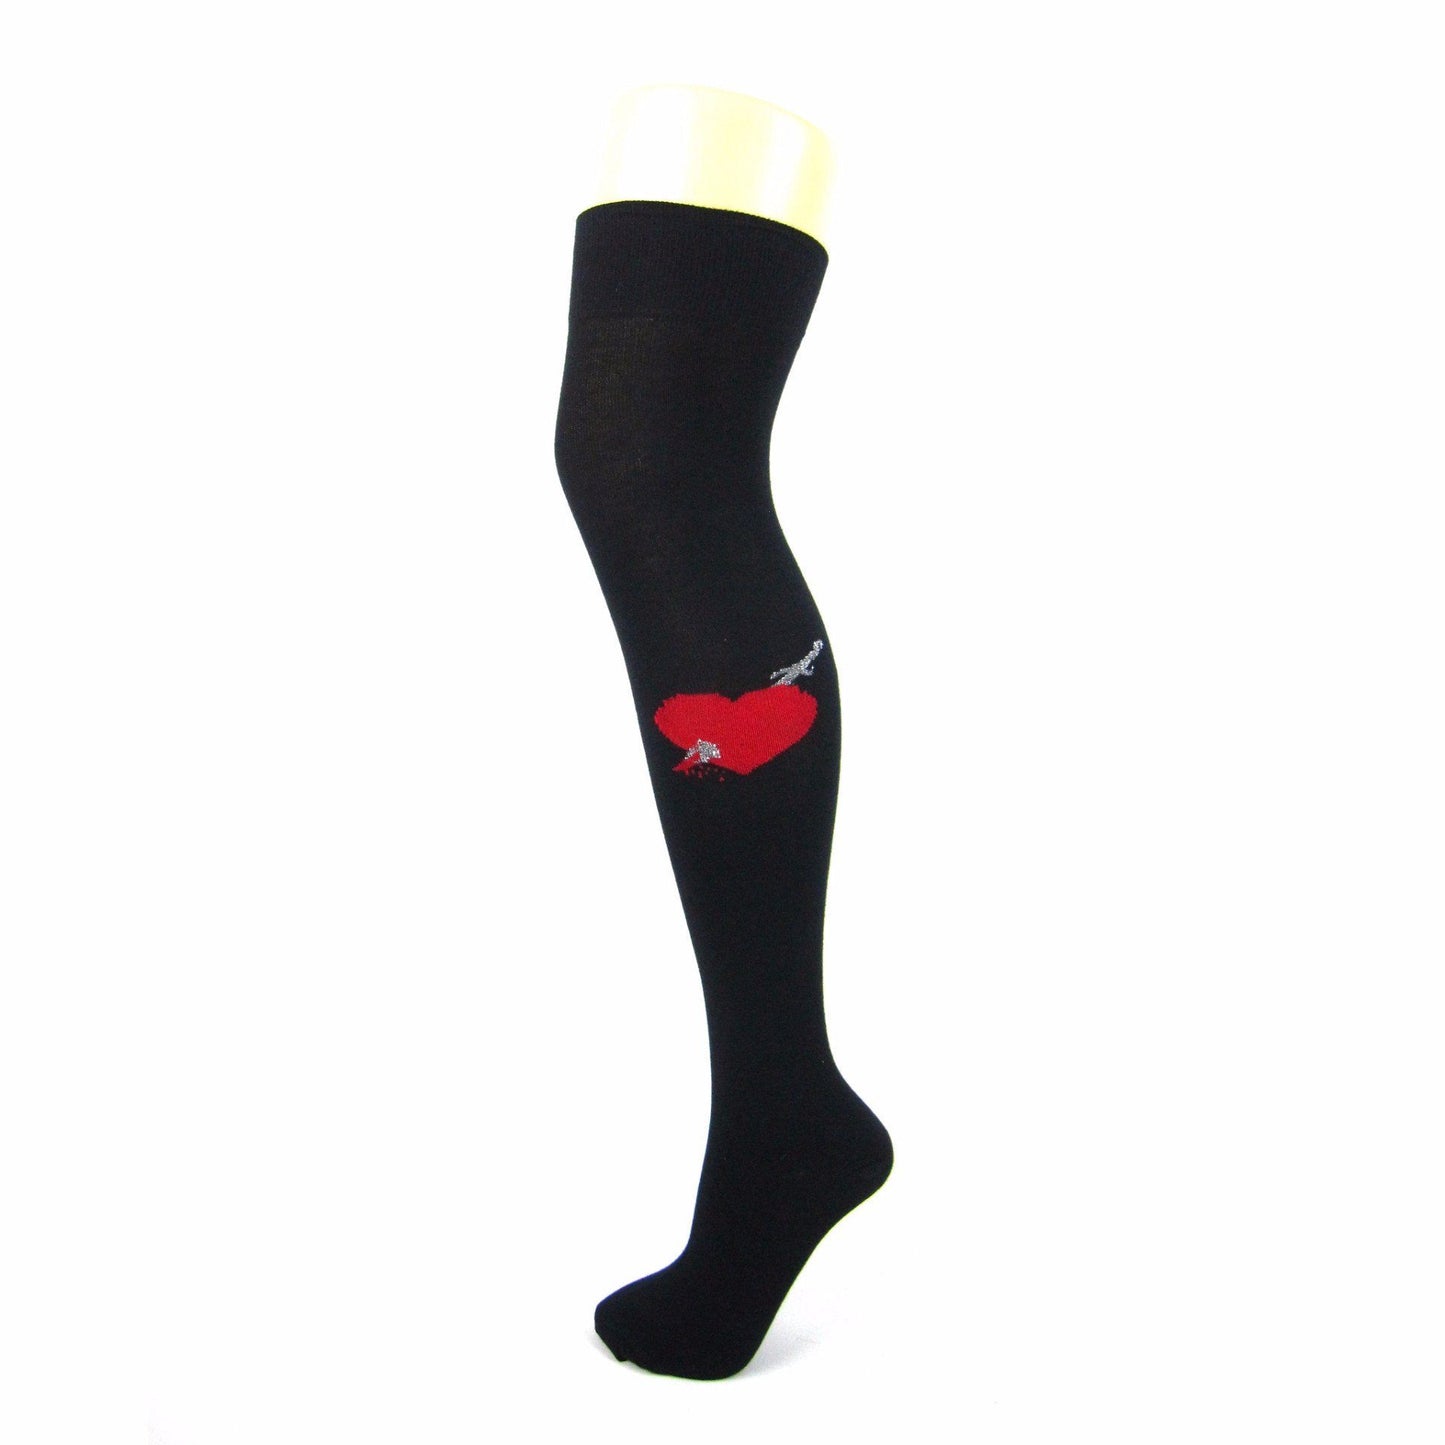 Cotton Blend Over The Knee Socks With Heart & Dagger - Leggsbeautiful